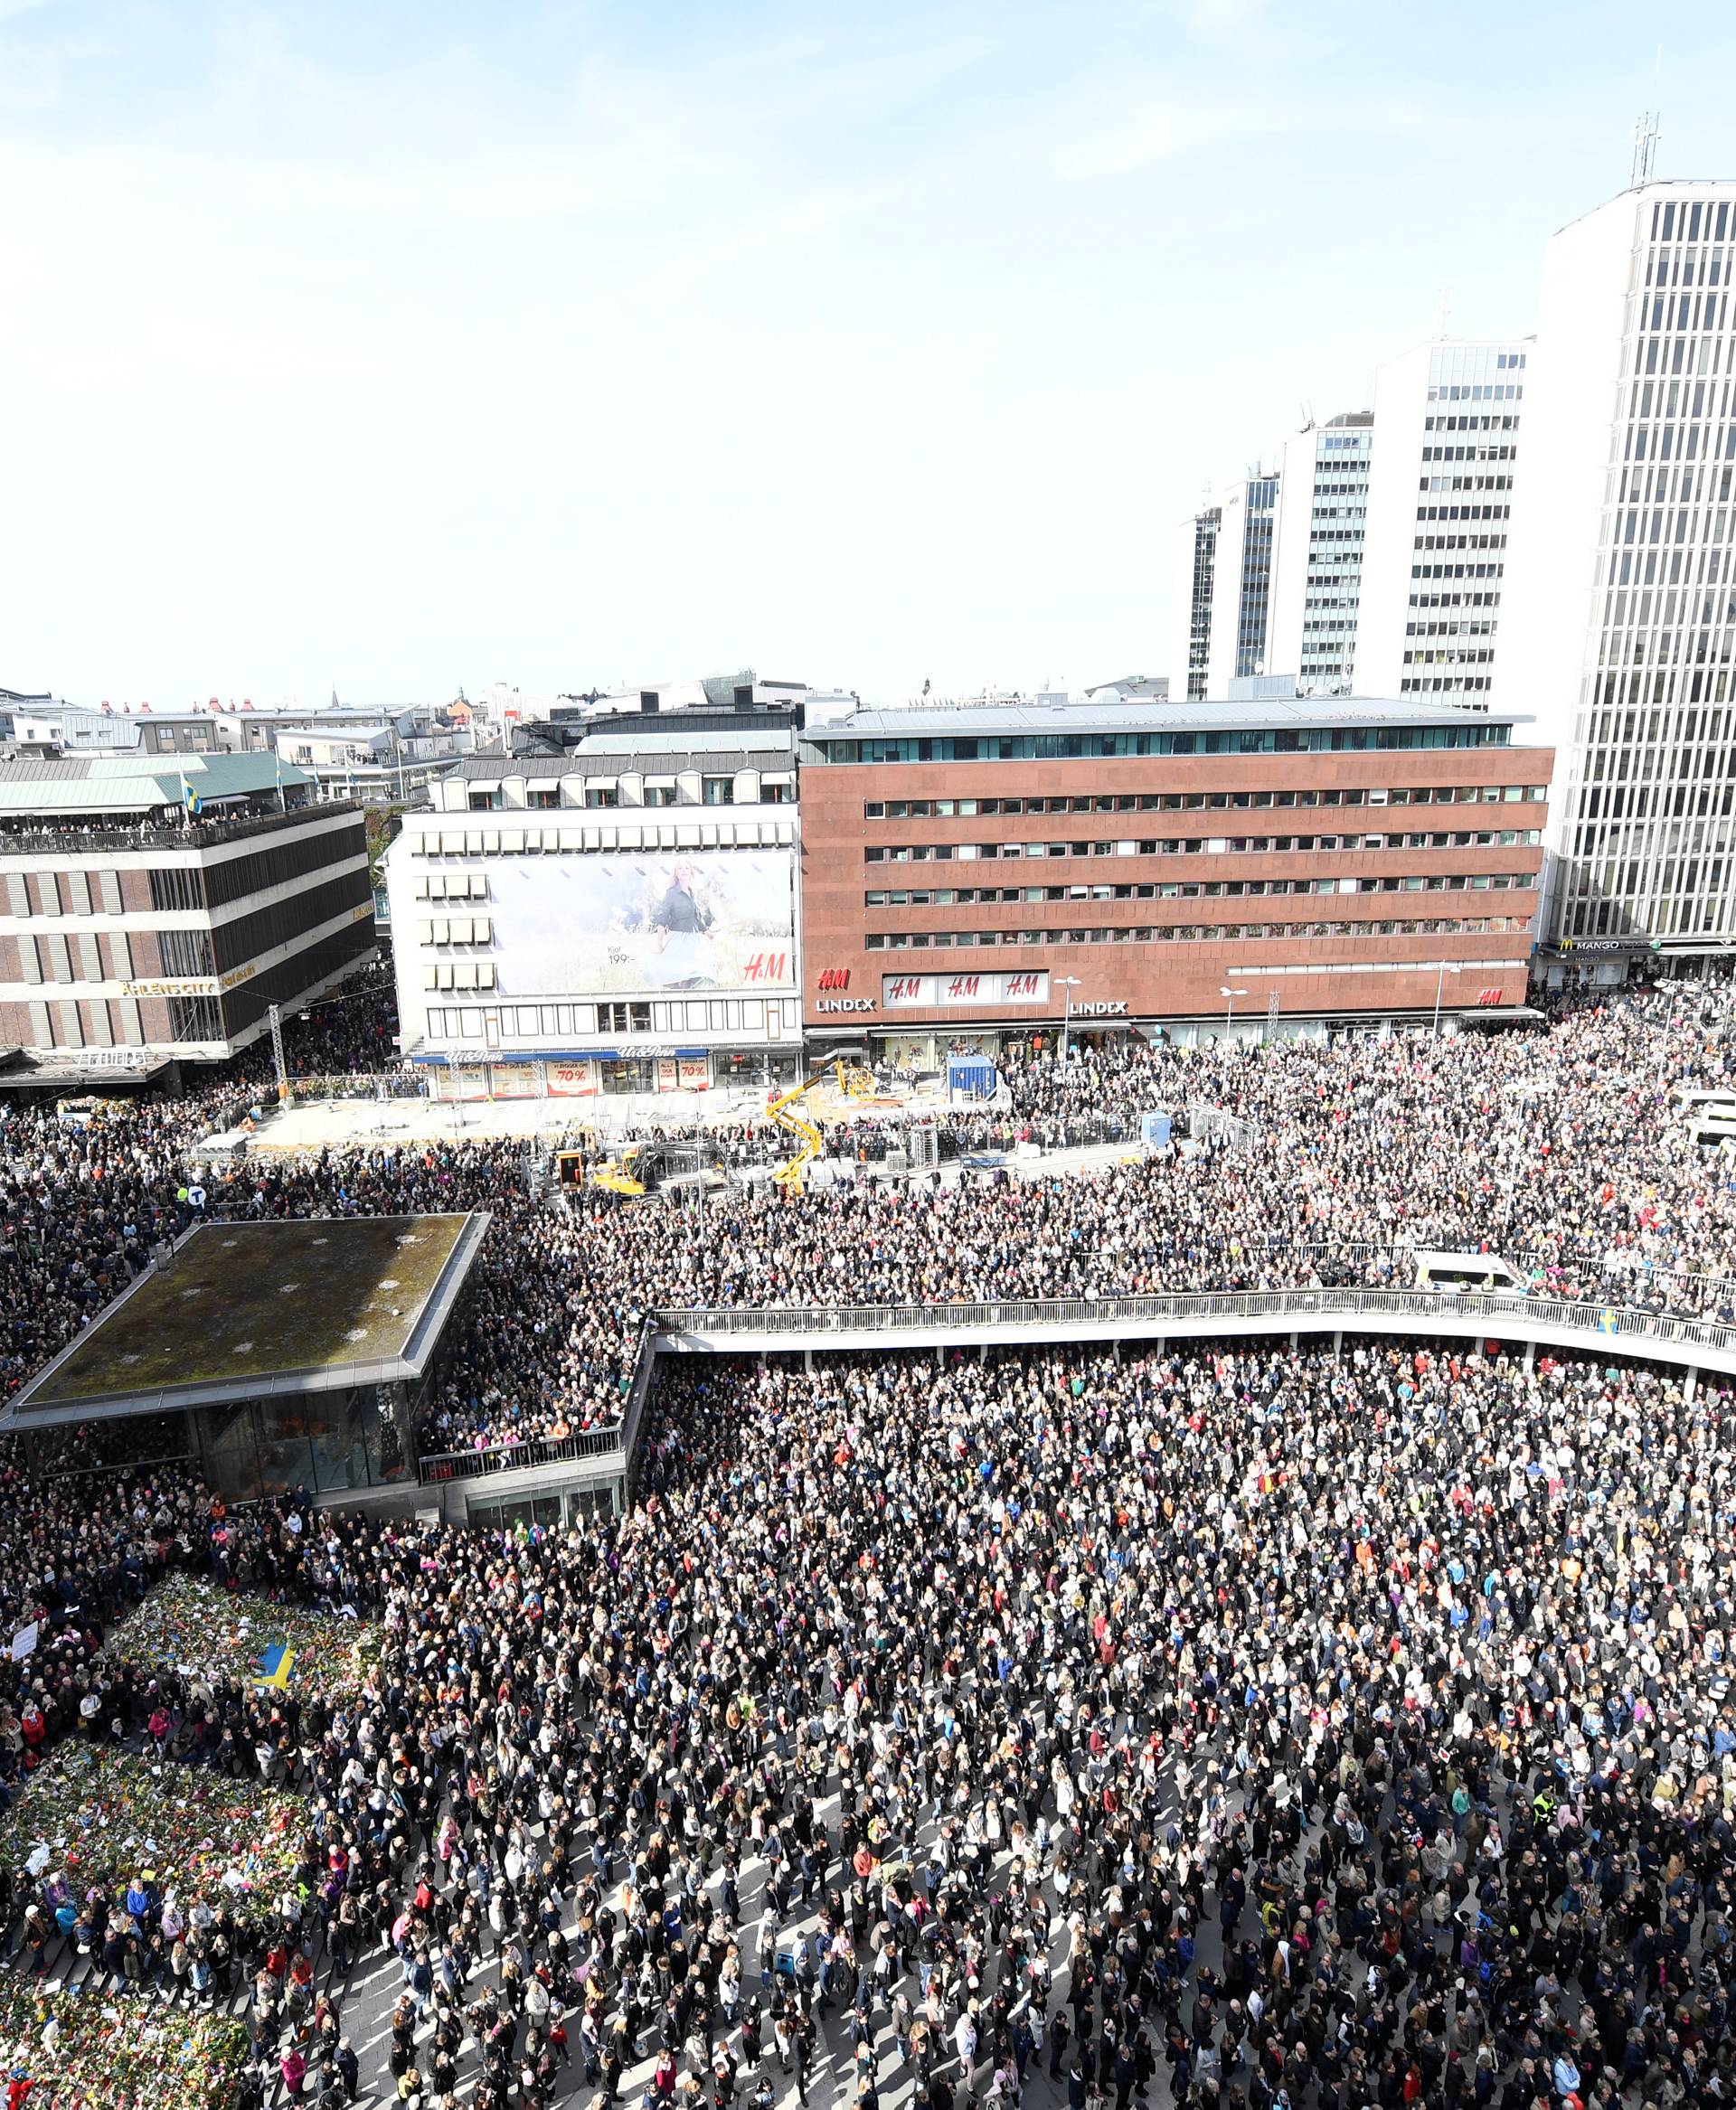 People gather in Sergels torg in central Stockholm for a "Lovefest" vigil against terrorism following Friday's attack